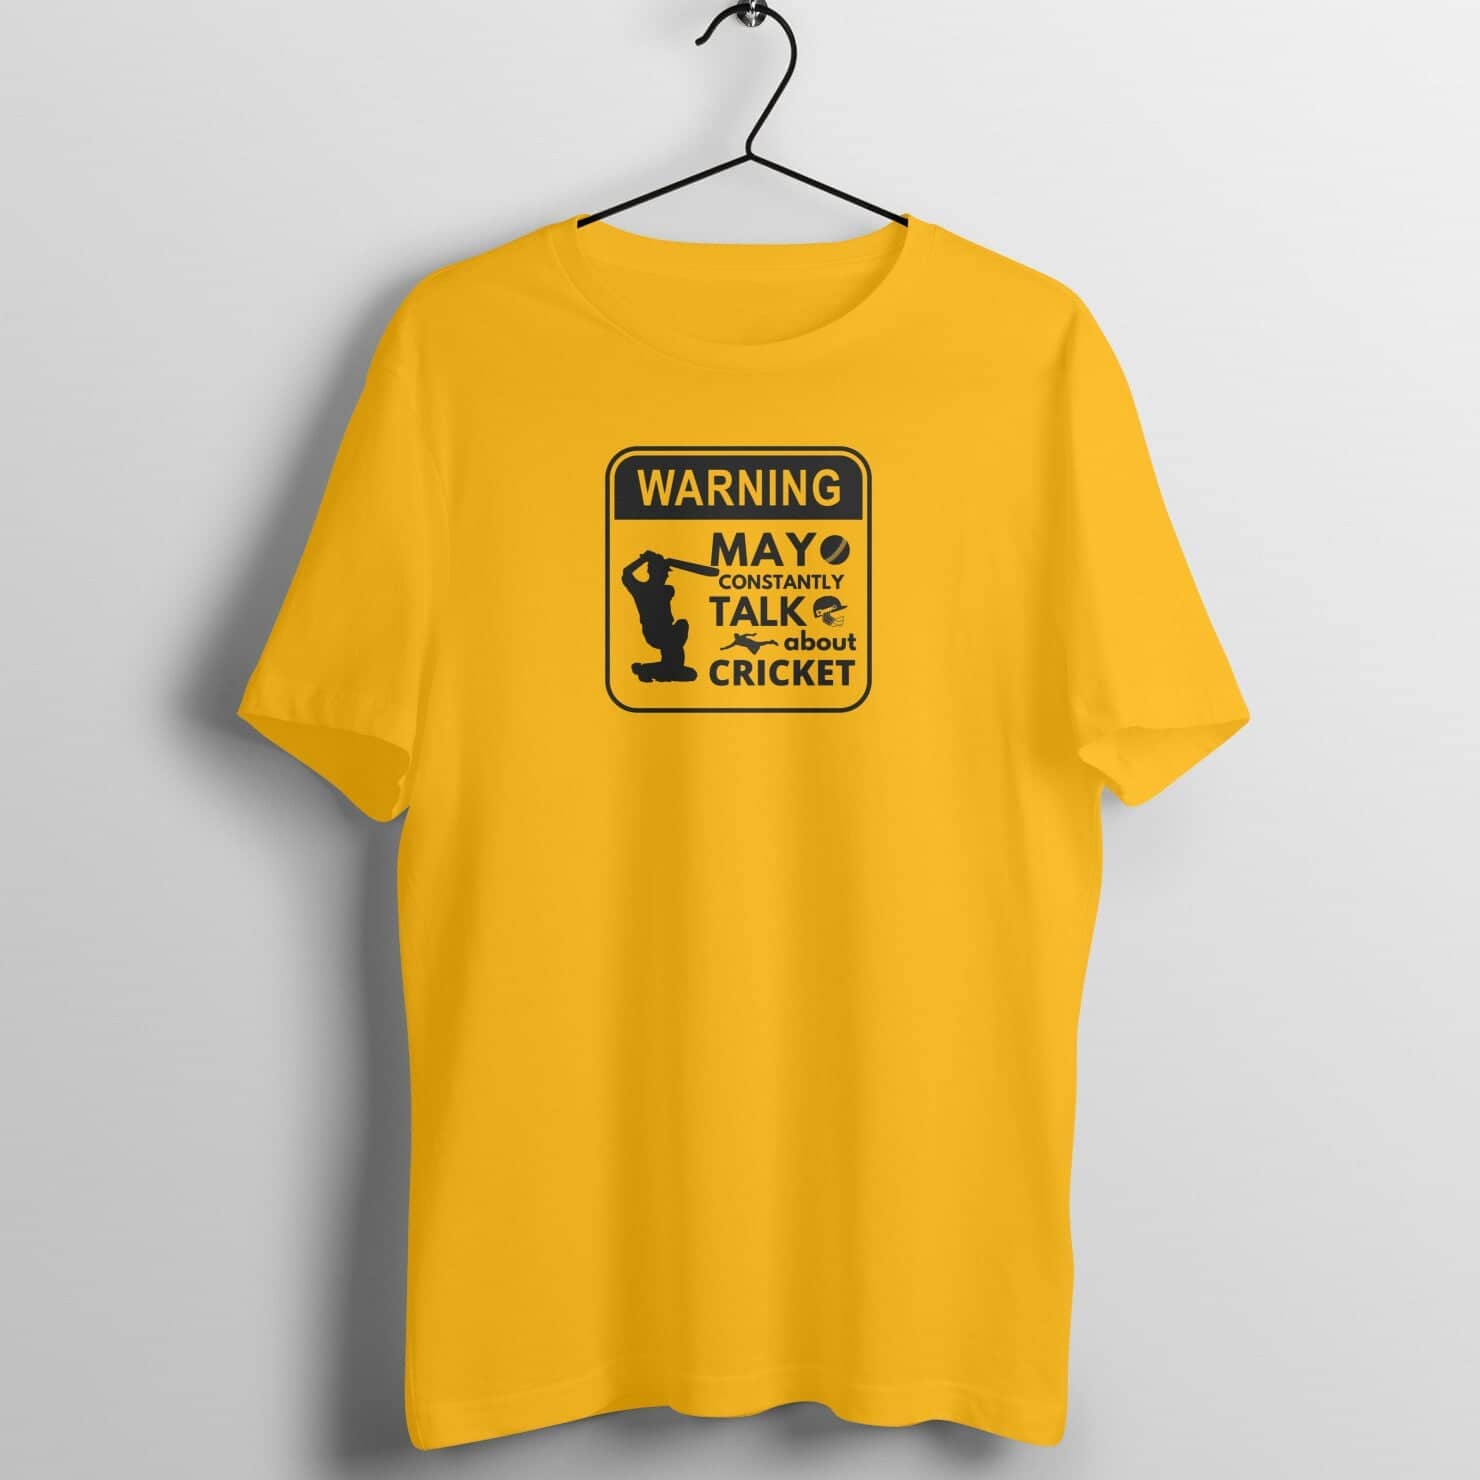 Warning May Constantly Talk About Cricket Exclusive Golden Yellow T Shirt for Men Printrove Golden Yellow S 